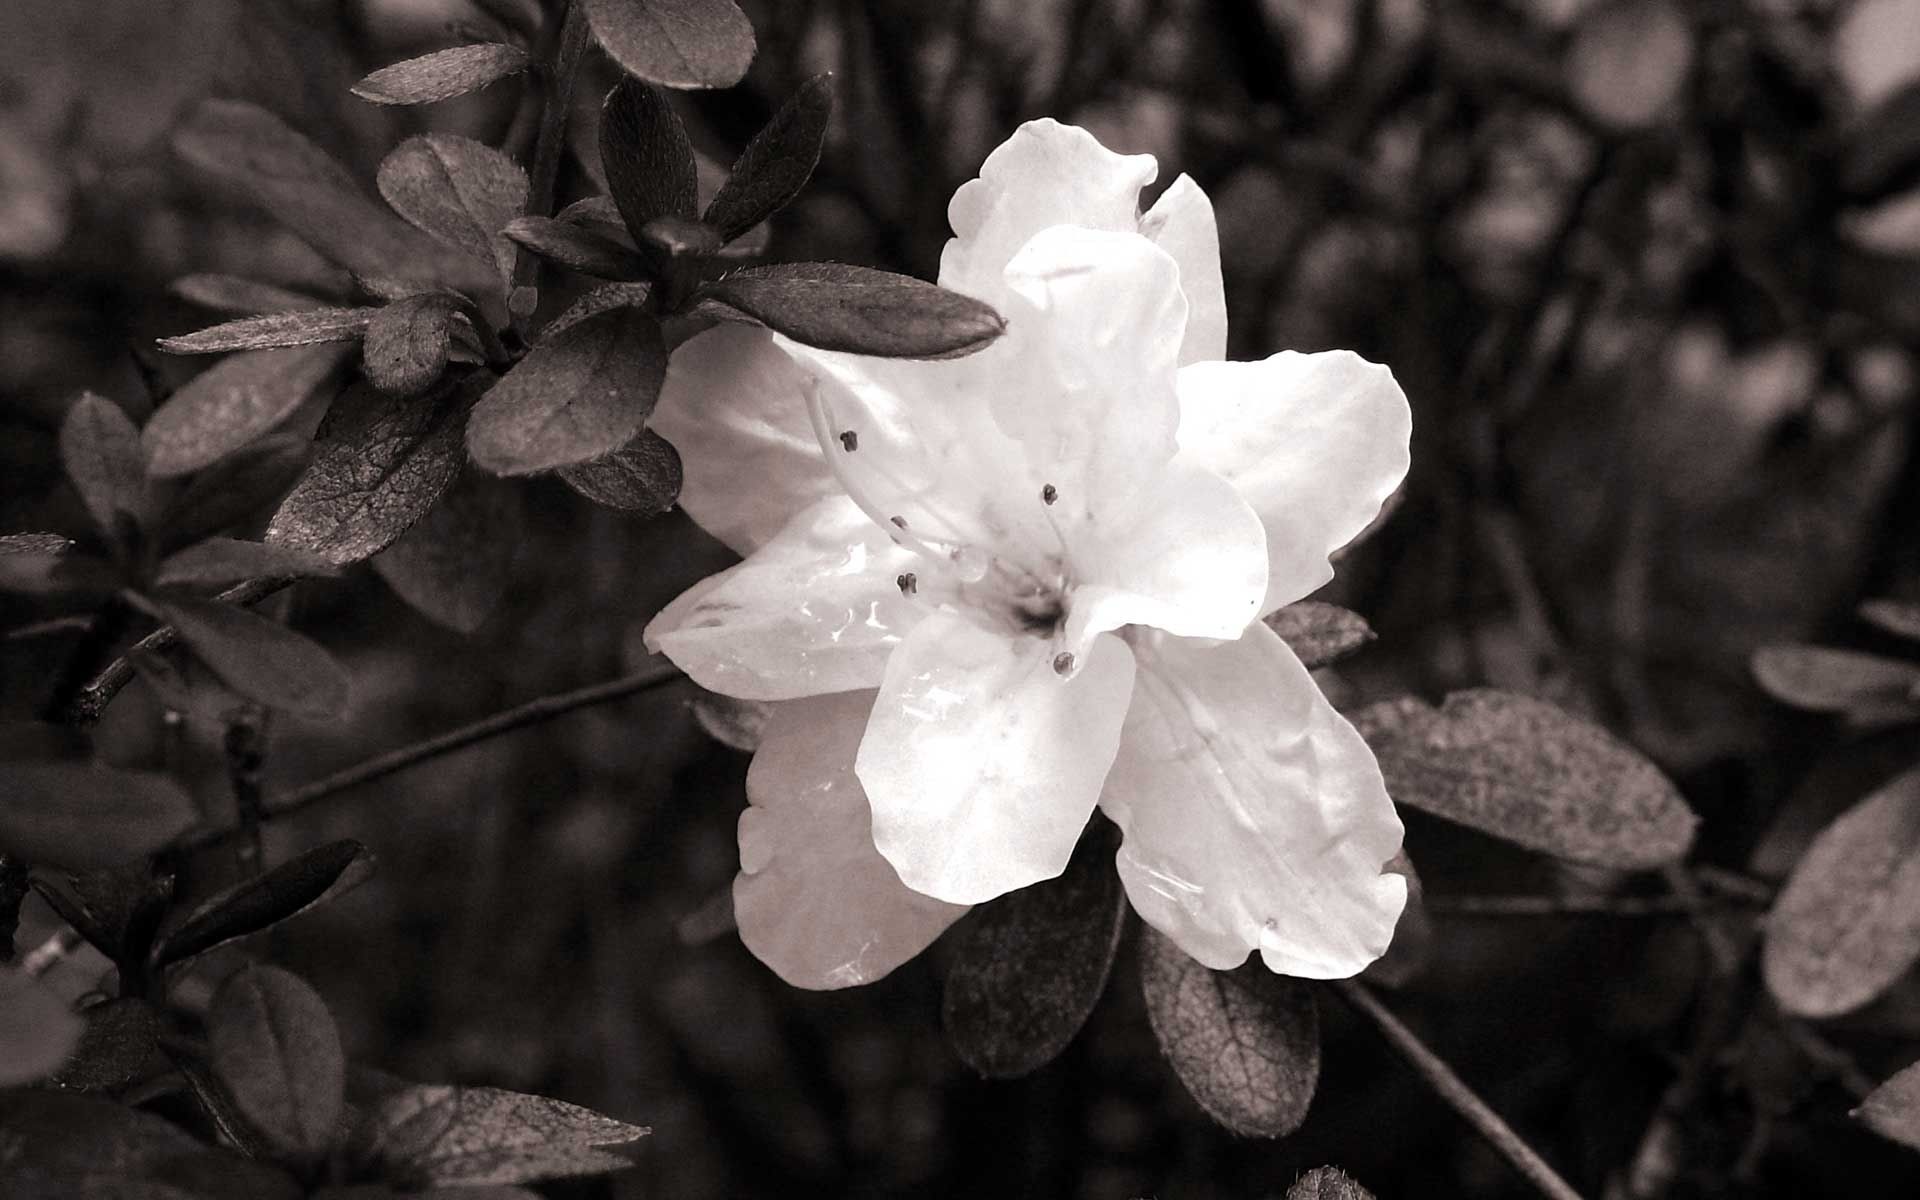 Black and White Floral Wallpaper for PC. Full HD Picture